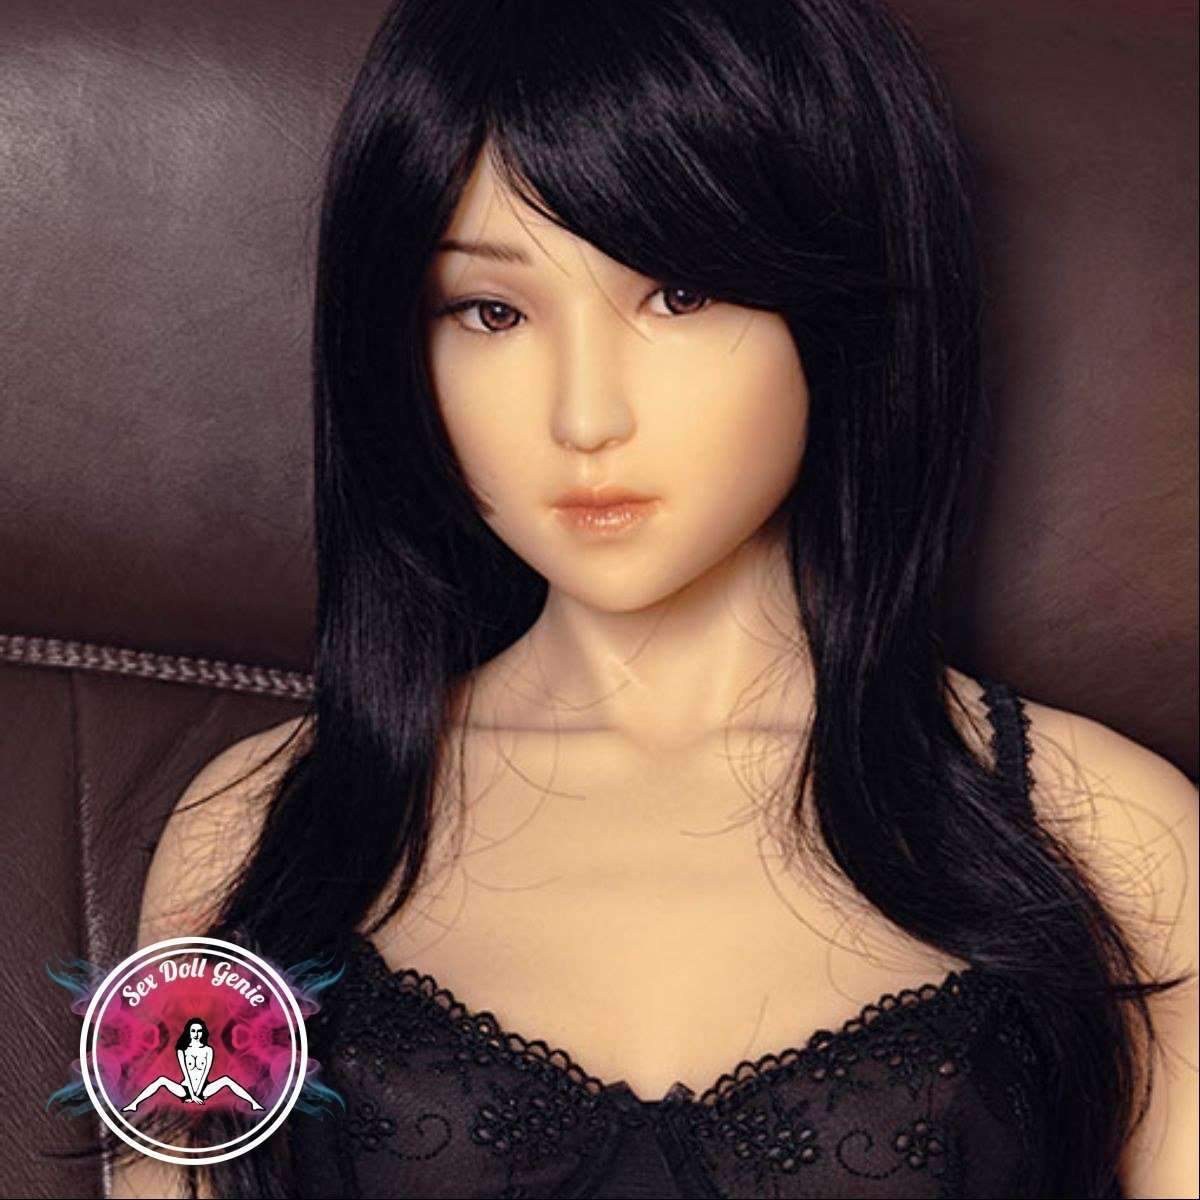 DS Doll - 163 - Emily Head - Type 1 D Cup Silicone Doll-1